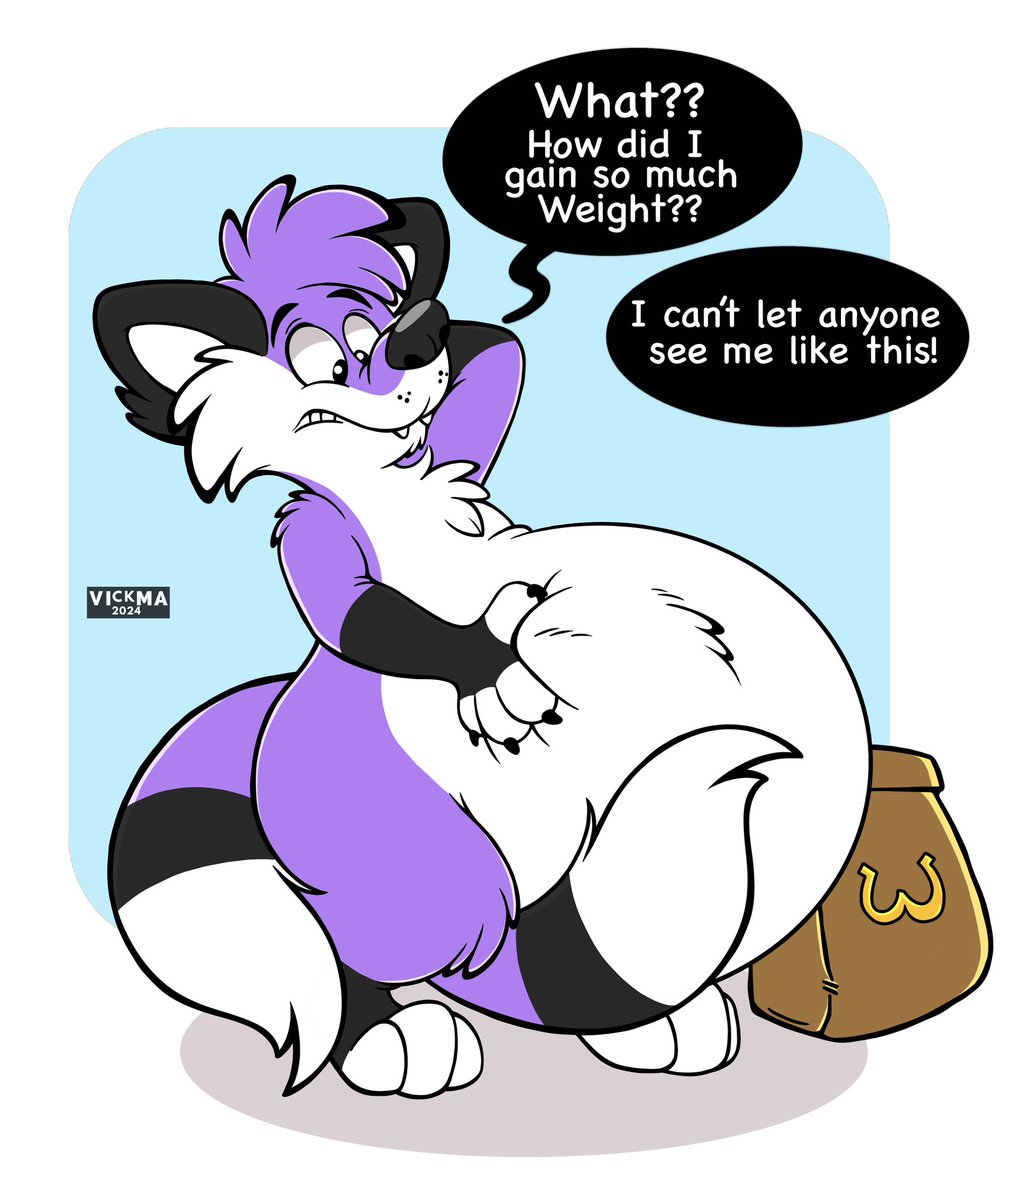 A commission for @RileyTheToon If one day you suddenly find that you're getting extra soft in the middle, maybe you need a bigger tail to cover your tummy, or maybe a pair. Or maybe you should lay off the take-away for a while